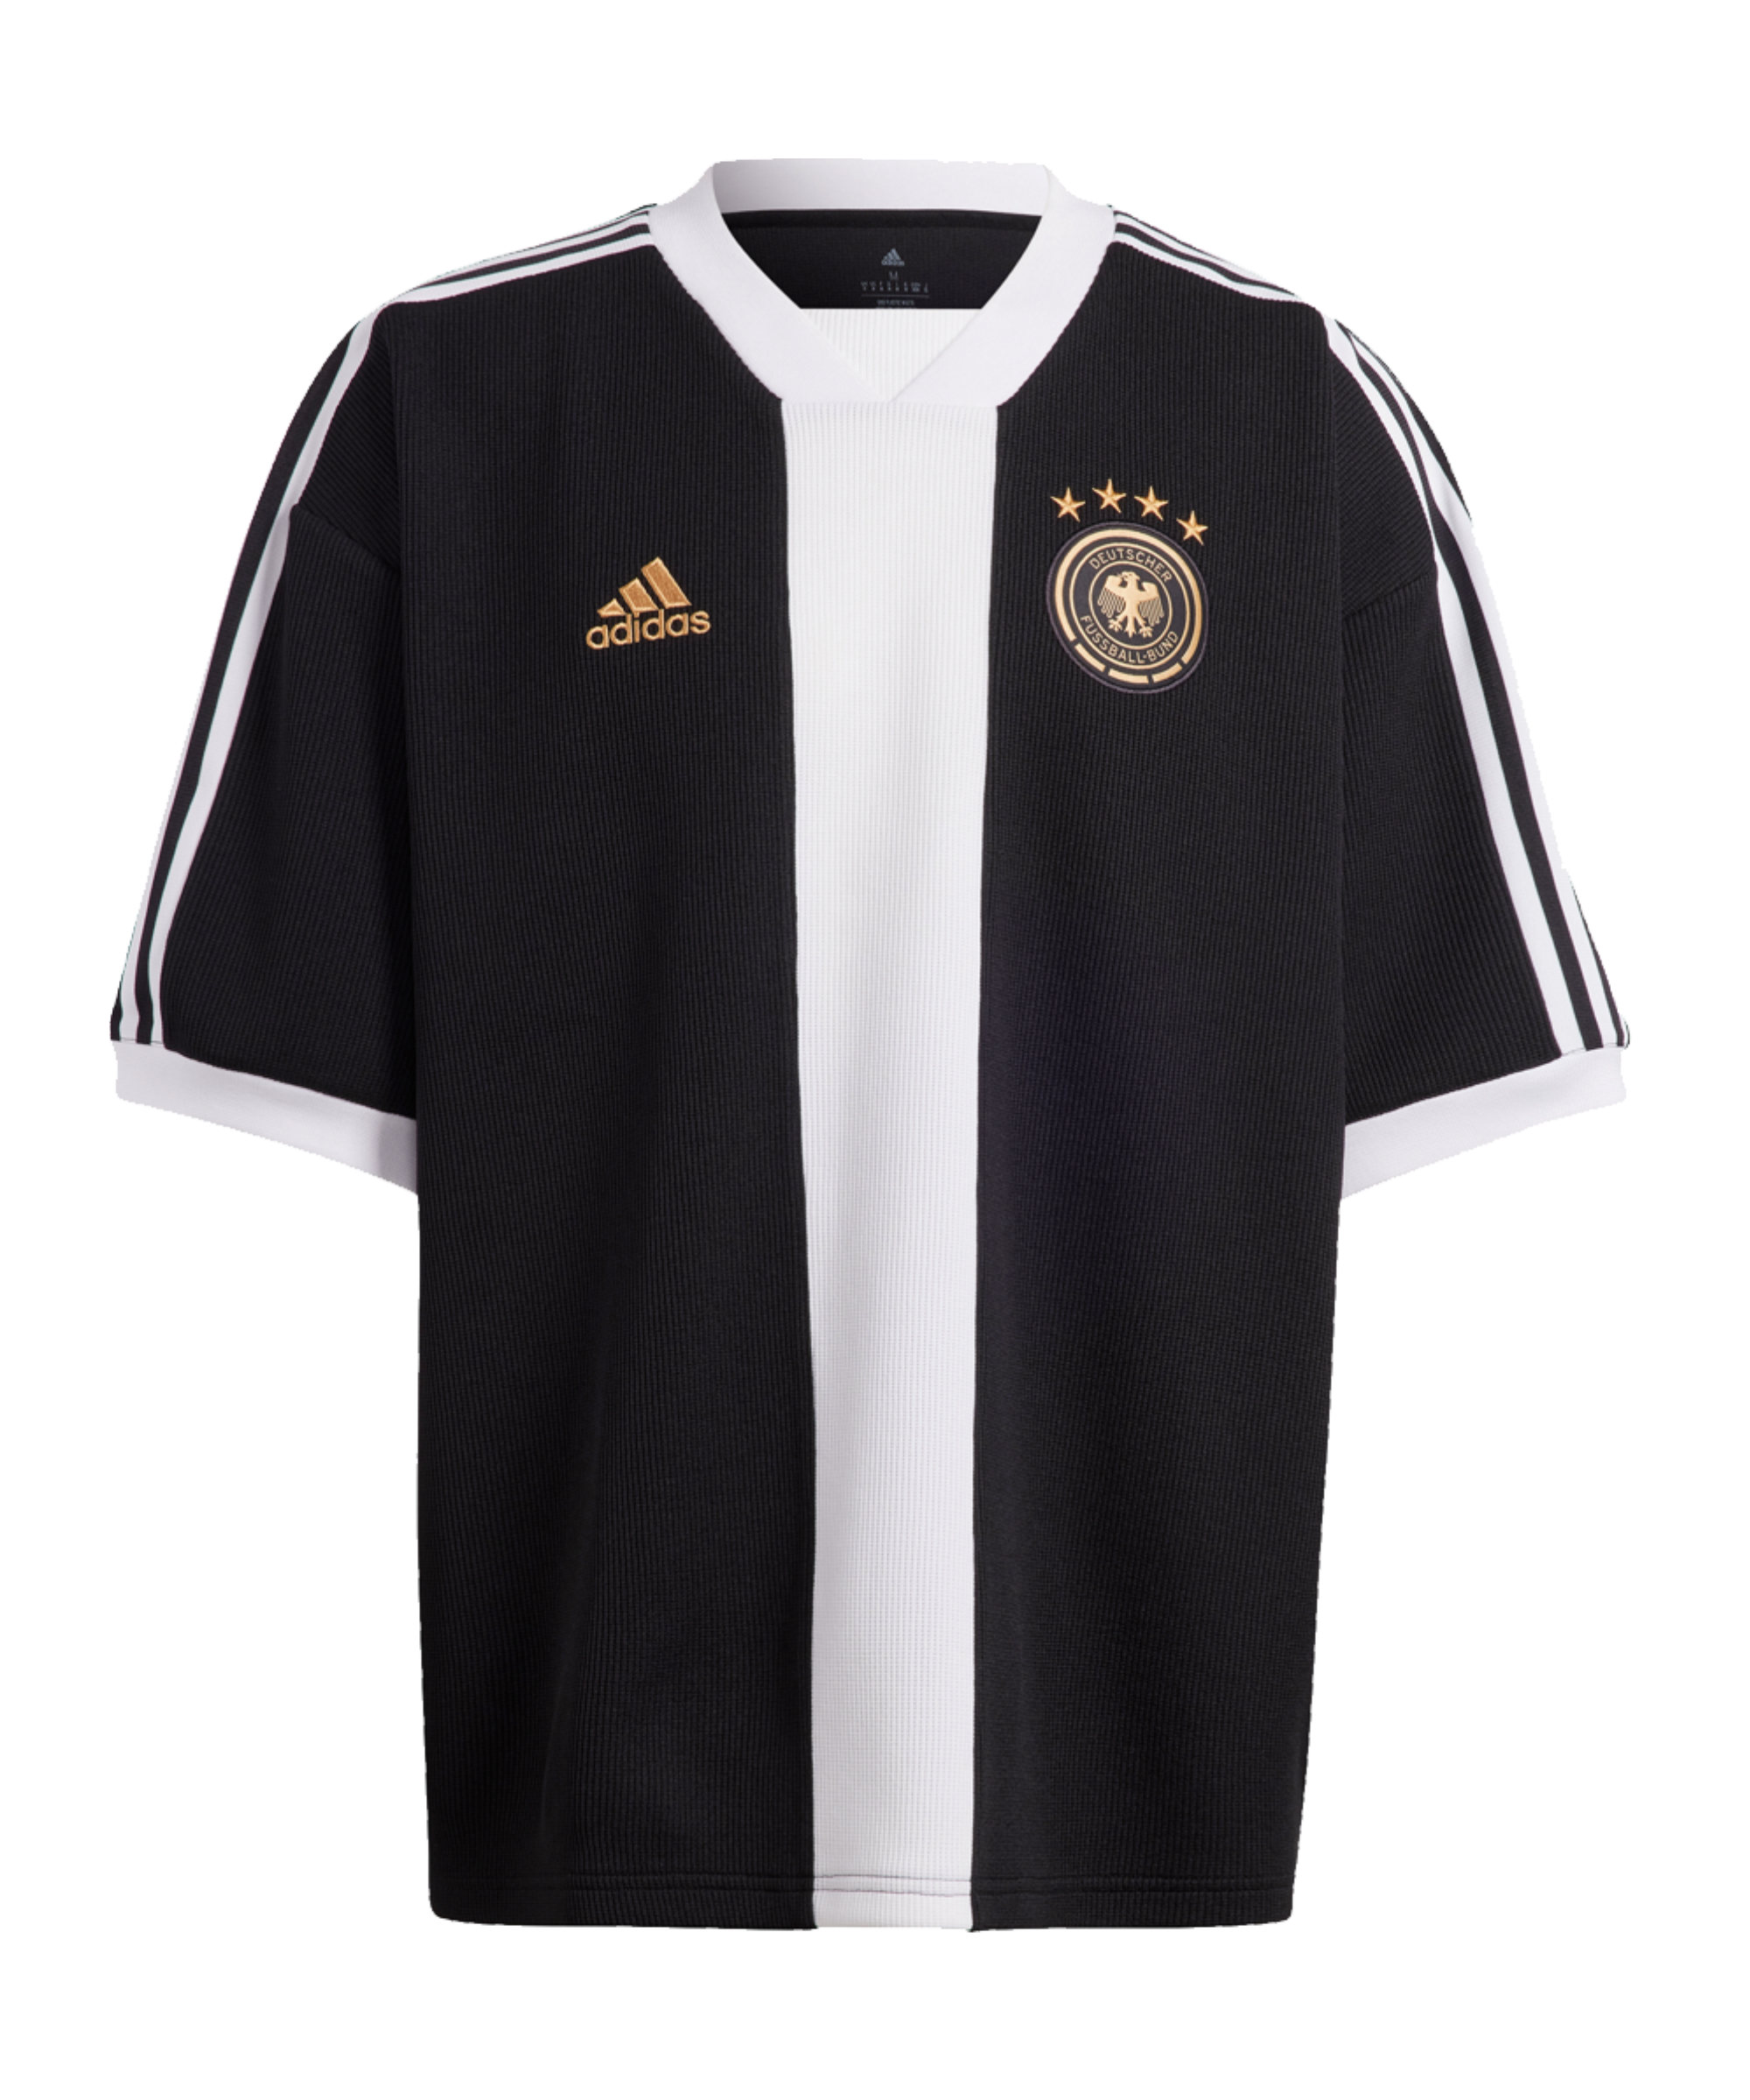 Germany National Team adidas Icon Jersey - White